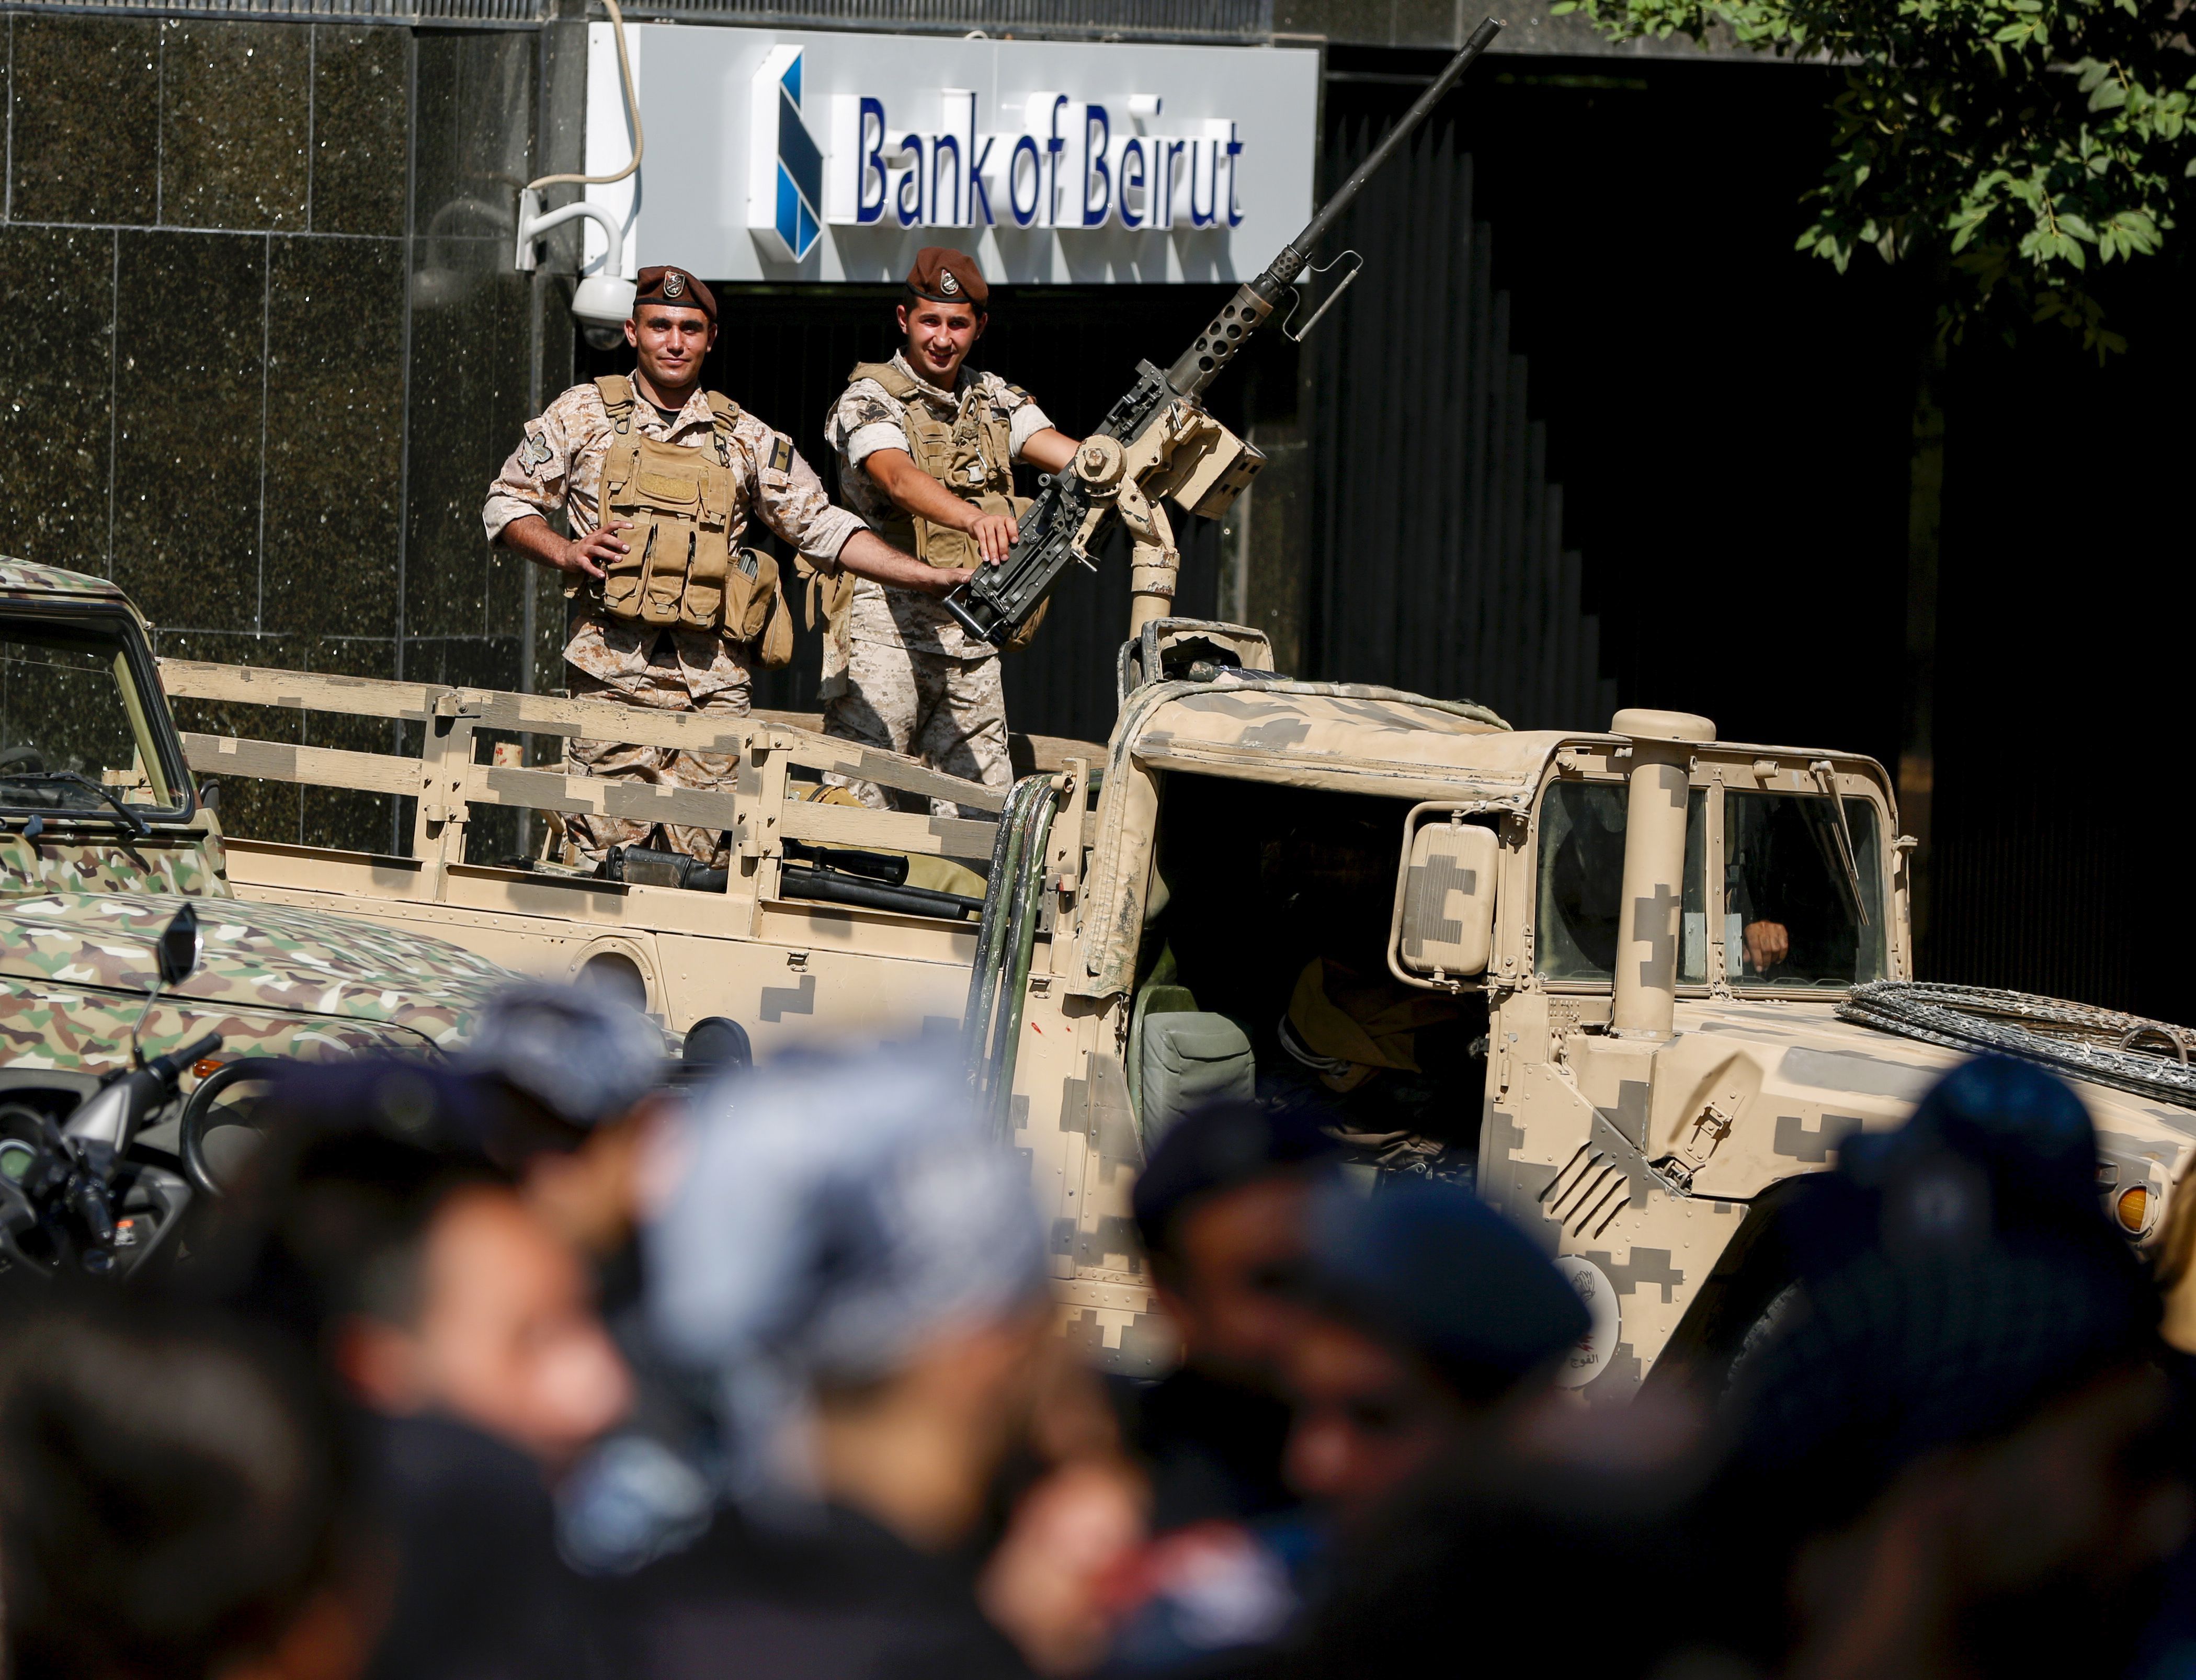 In this image, two soldiers holding a gun on top of an armored truck watch protestors from a distance. The truck is parked in front of a bank